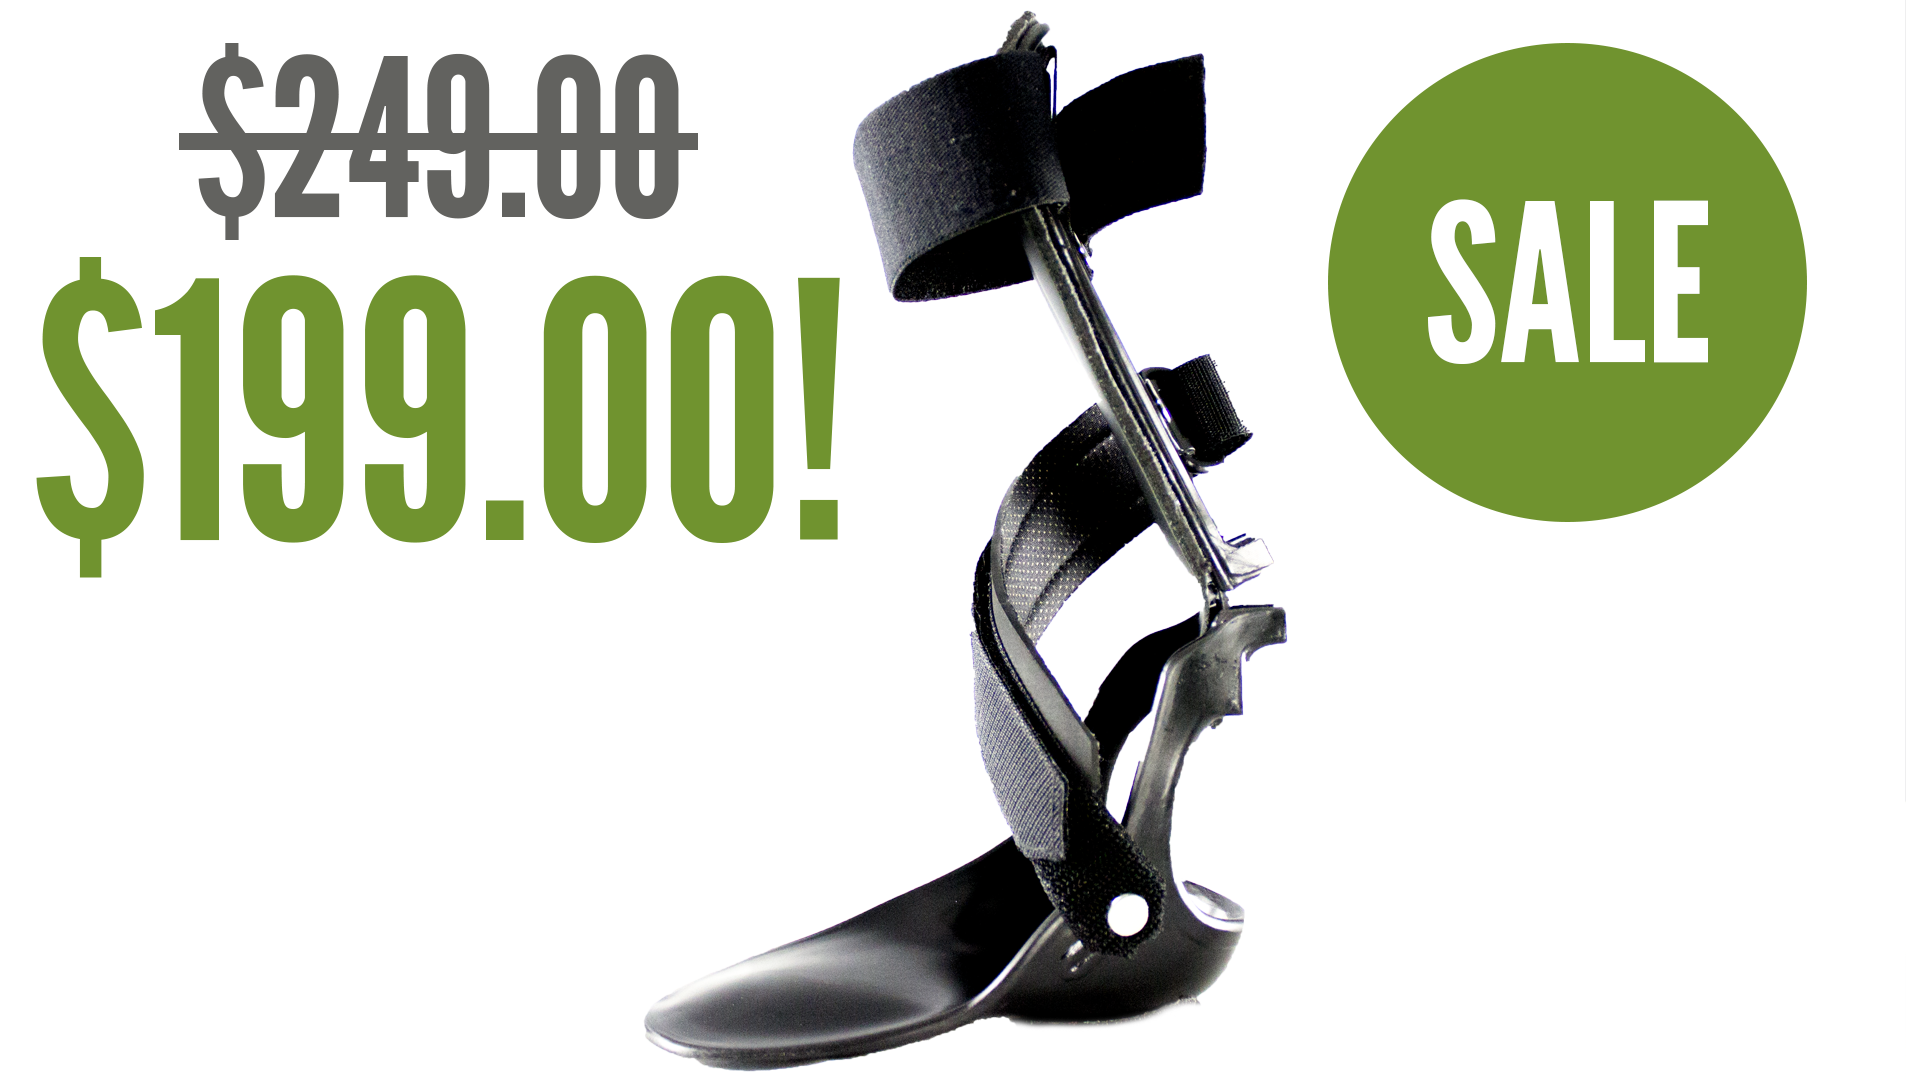 Our Step-Smart Drop Foot Brace is one sale for the low cost of $199. Normally $249!